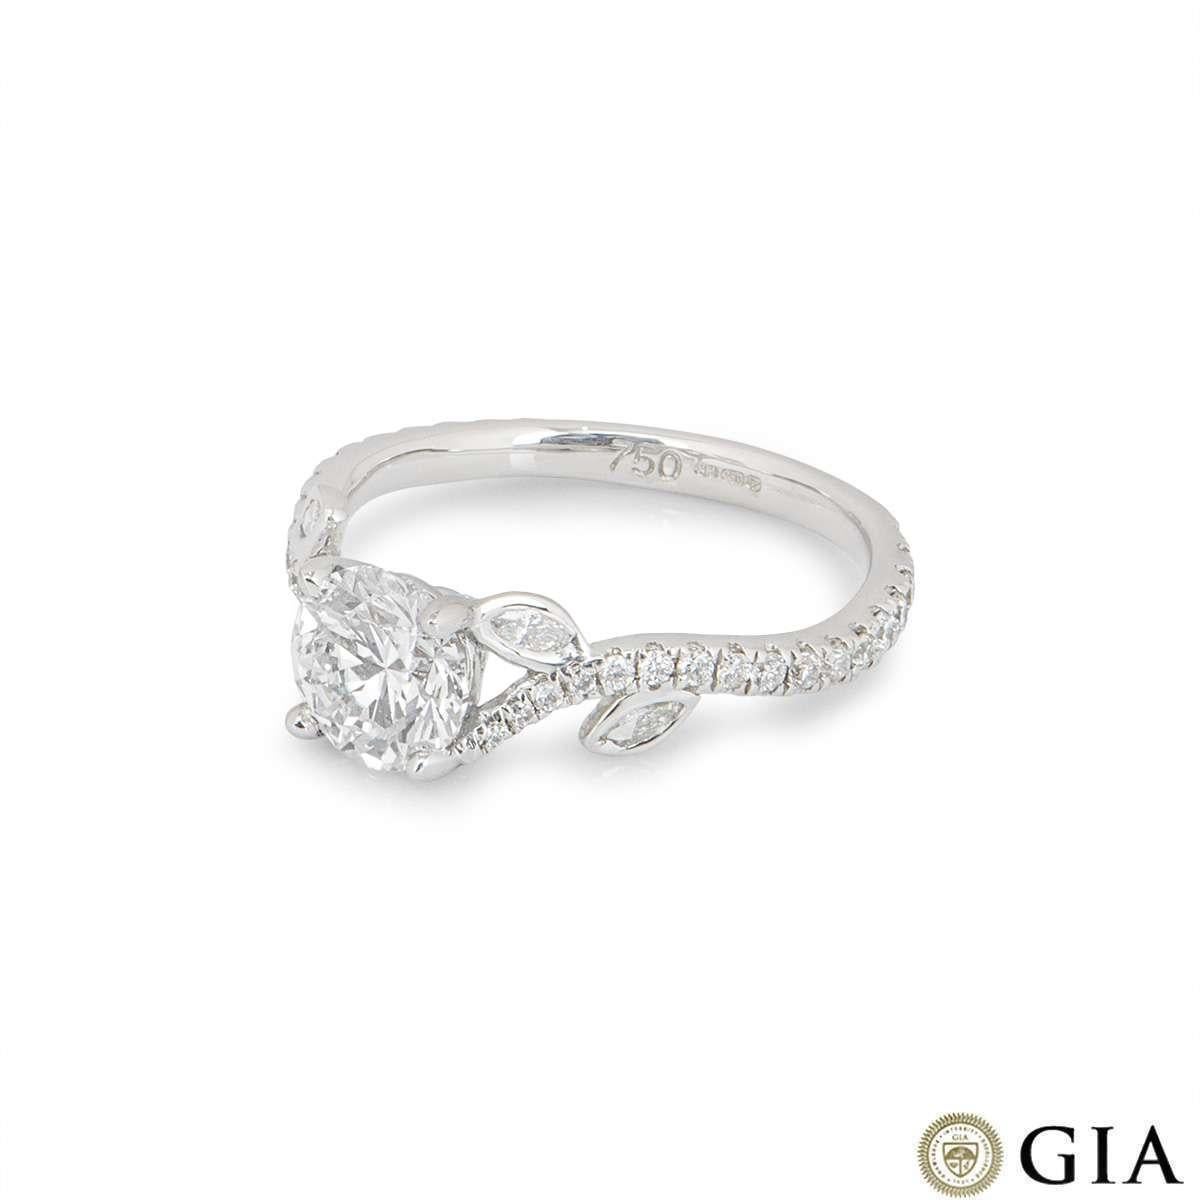 GIA Certified White Gold Round Brilliant Cut Diamond Ring 1.01ct E/VVS1 In New Condition For Sale In London, GB